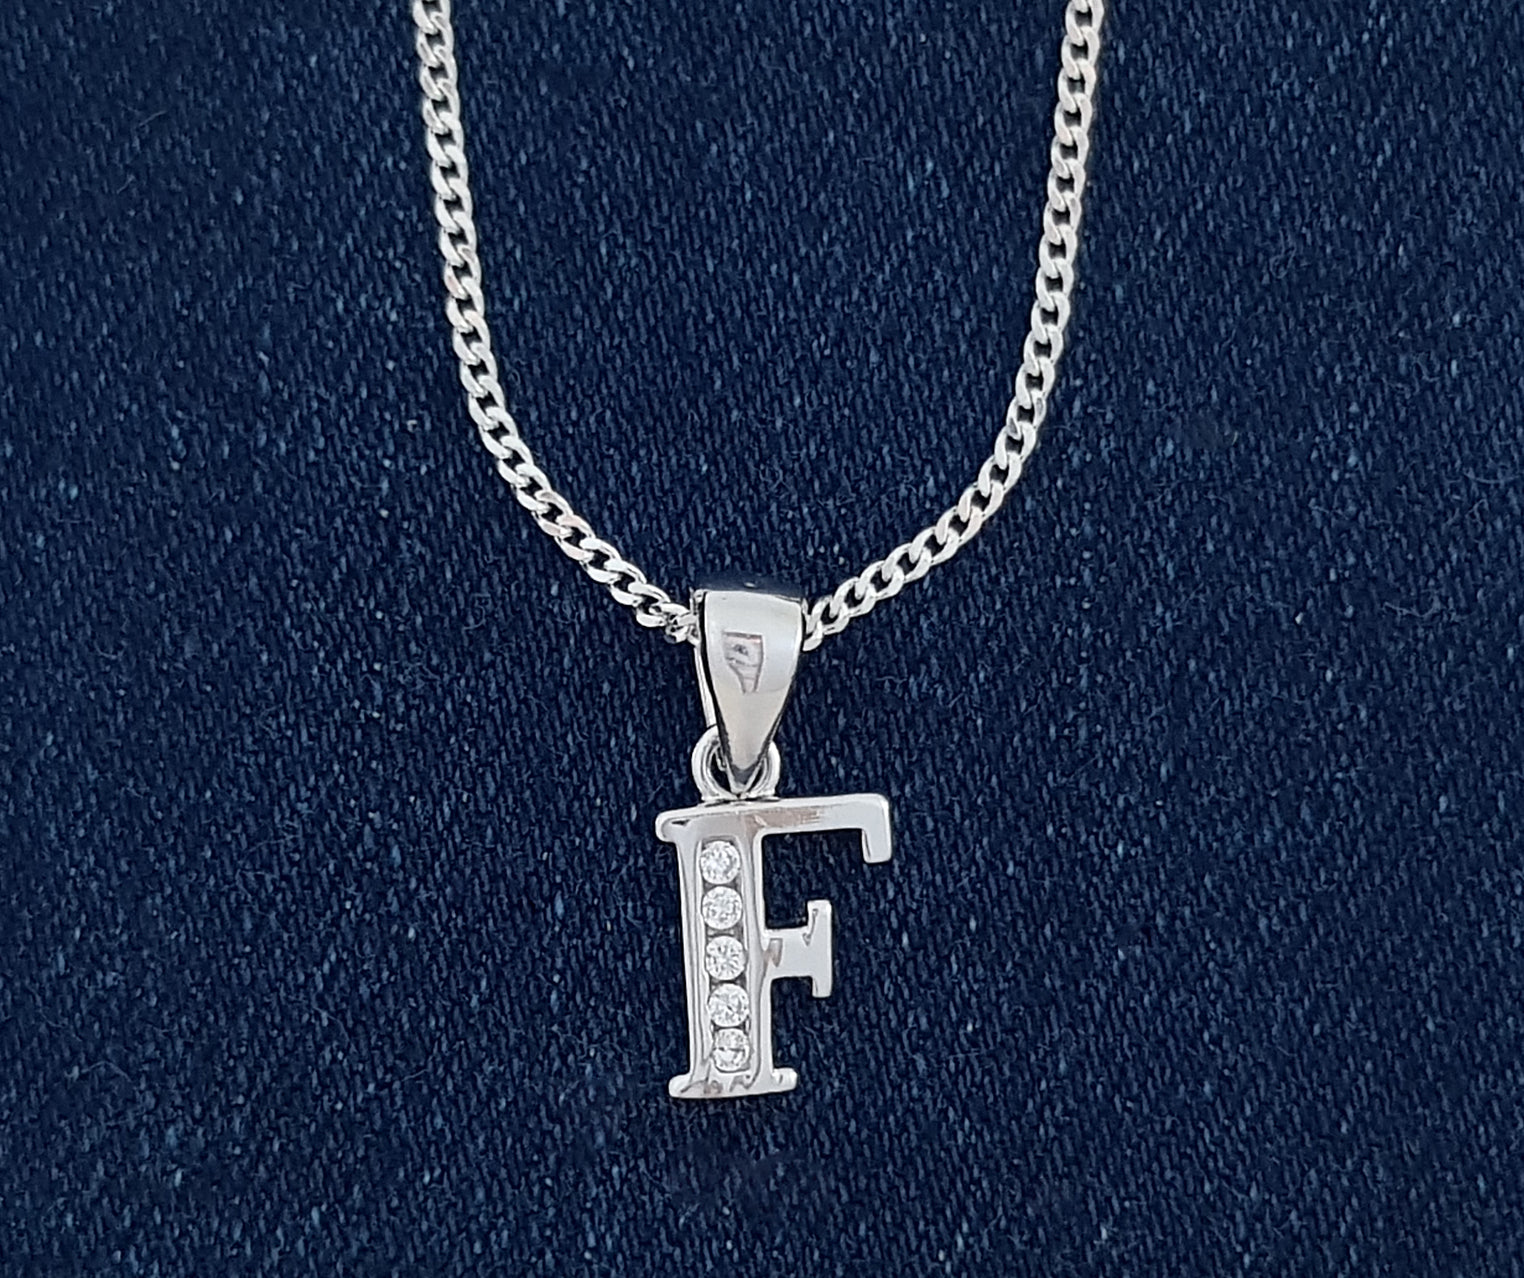 Sterling Silver Initial with Cubic Zirconia Stones- "F" Initial or Letter